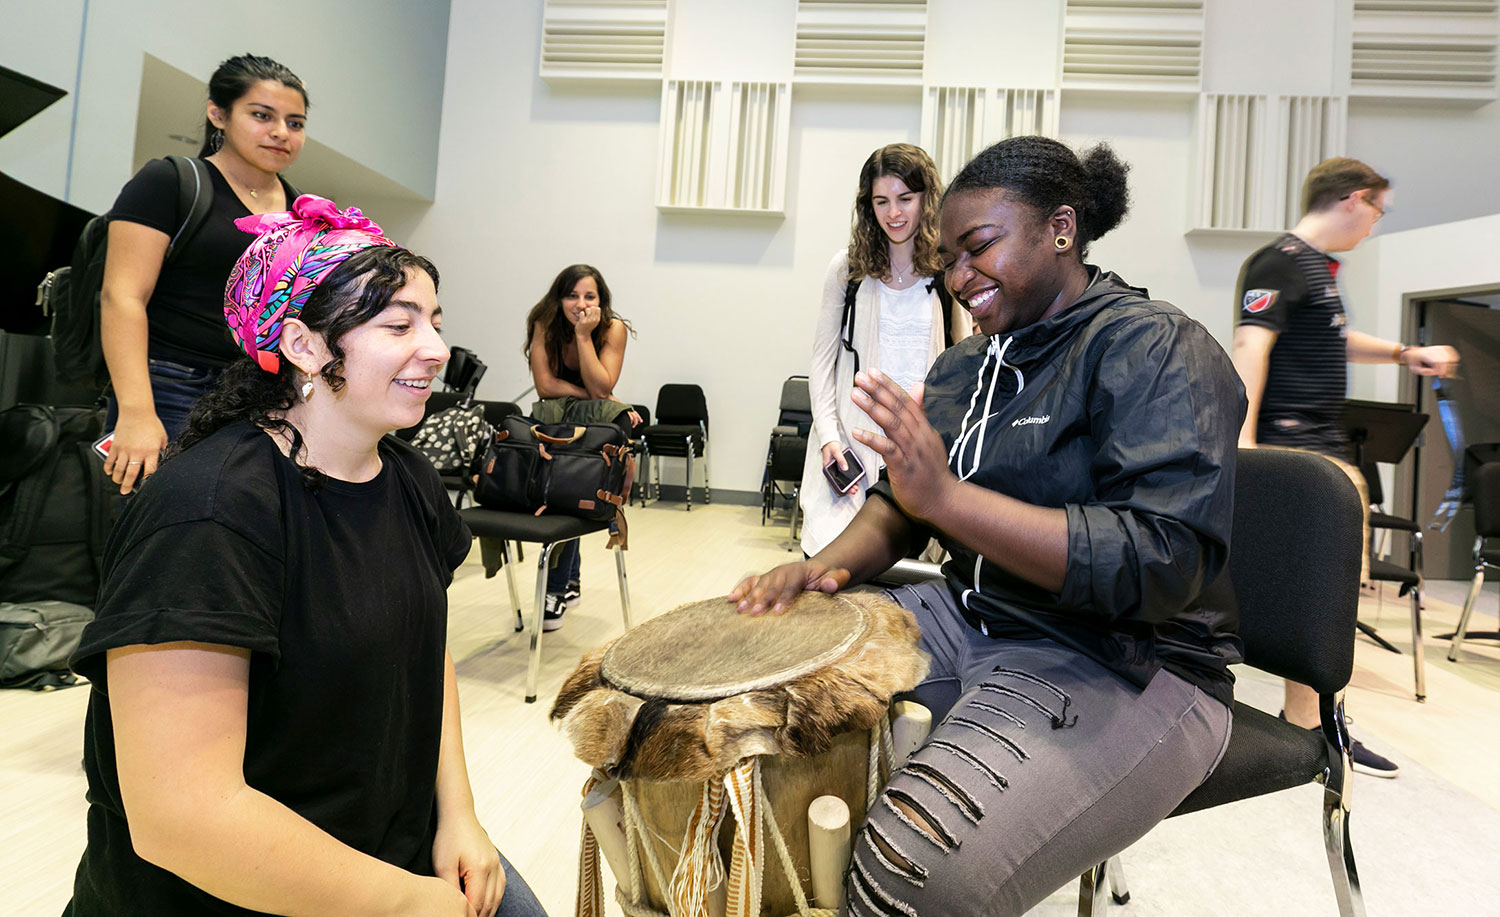 Latin powerhouse all-female band worked with music students during a guest residency at Mason.